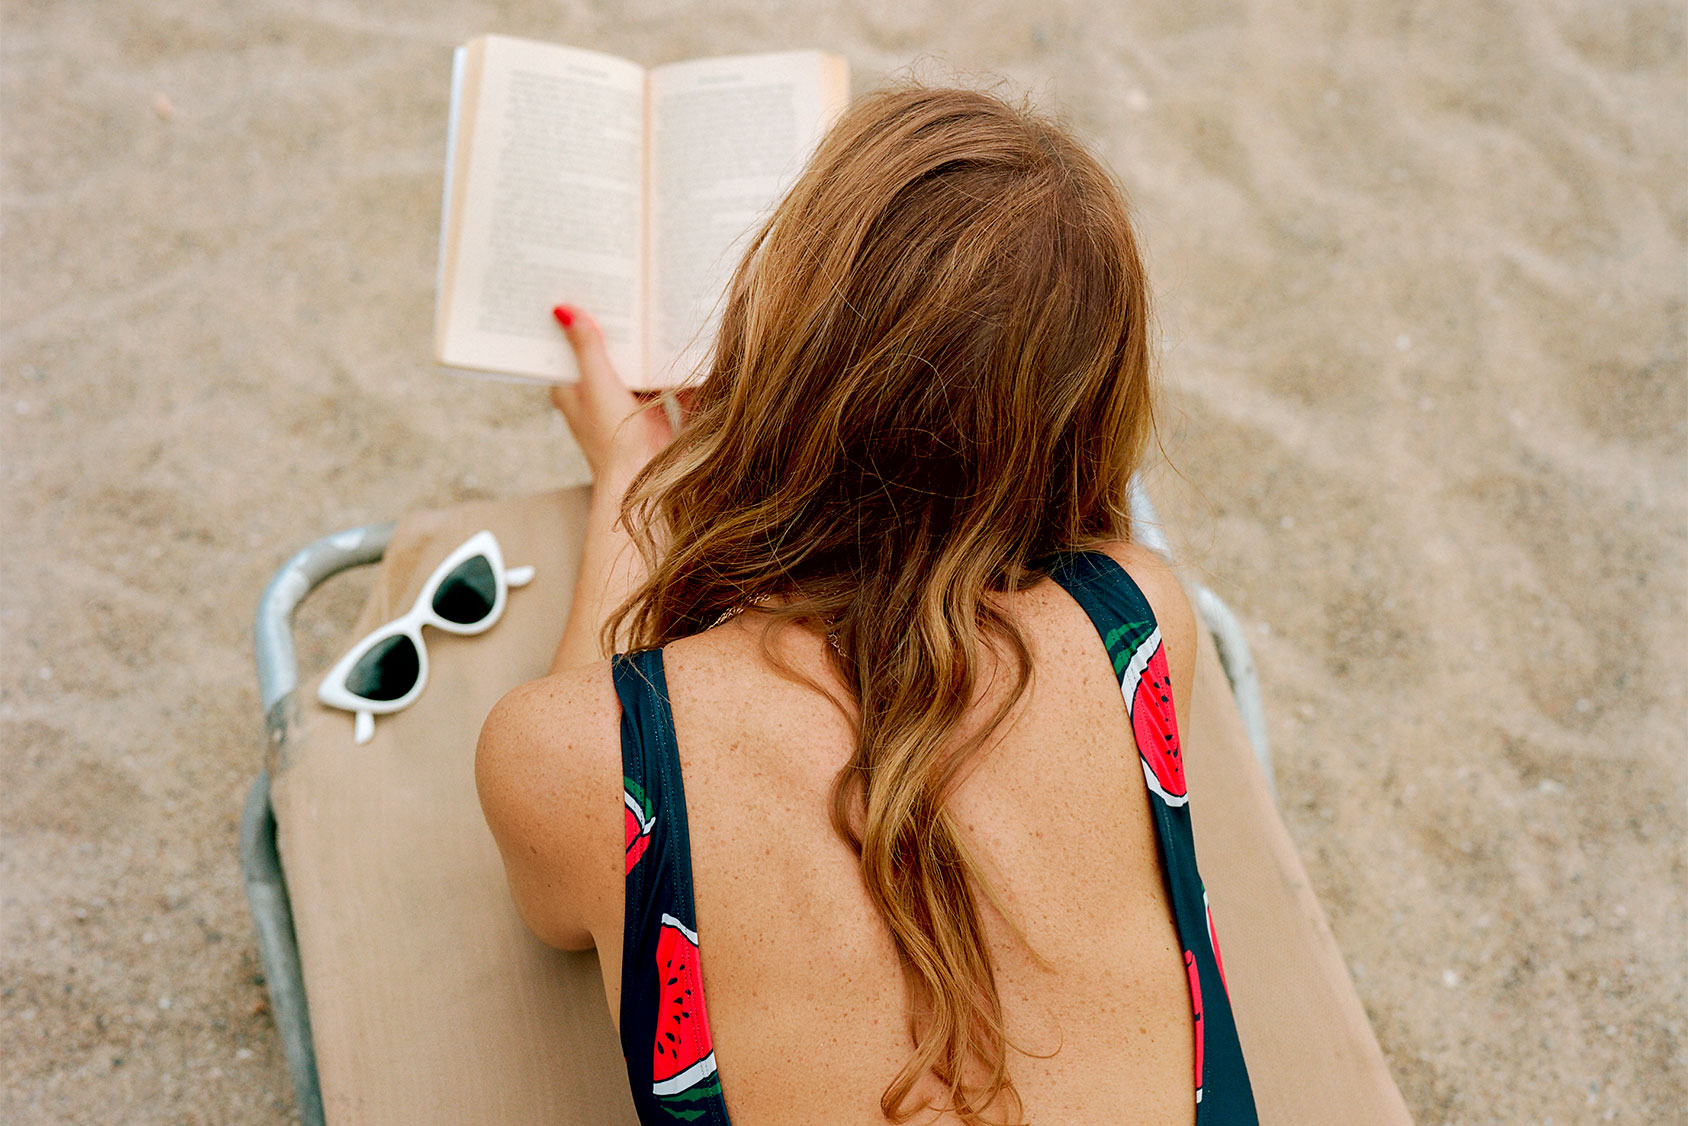 10 seriously good beach reads to pack in your suitcase this summer